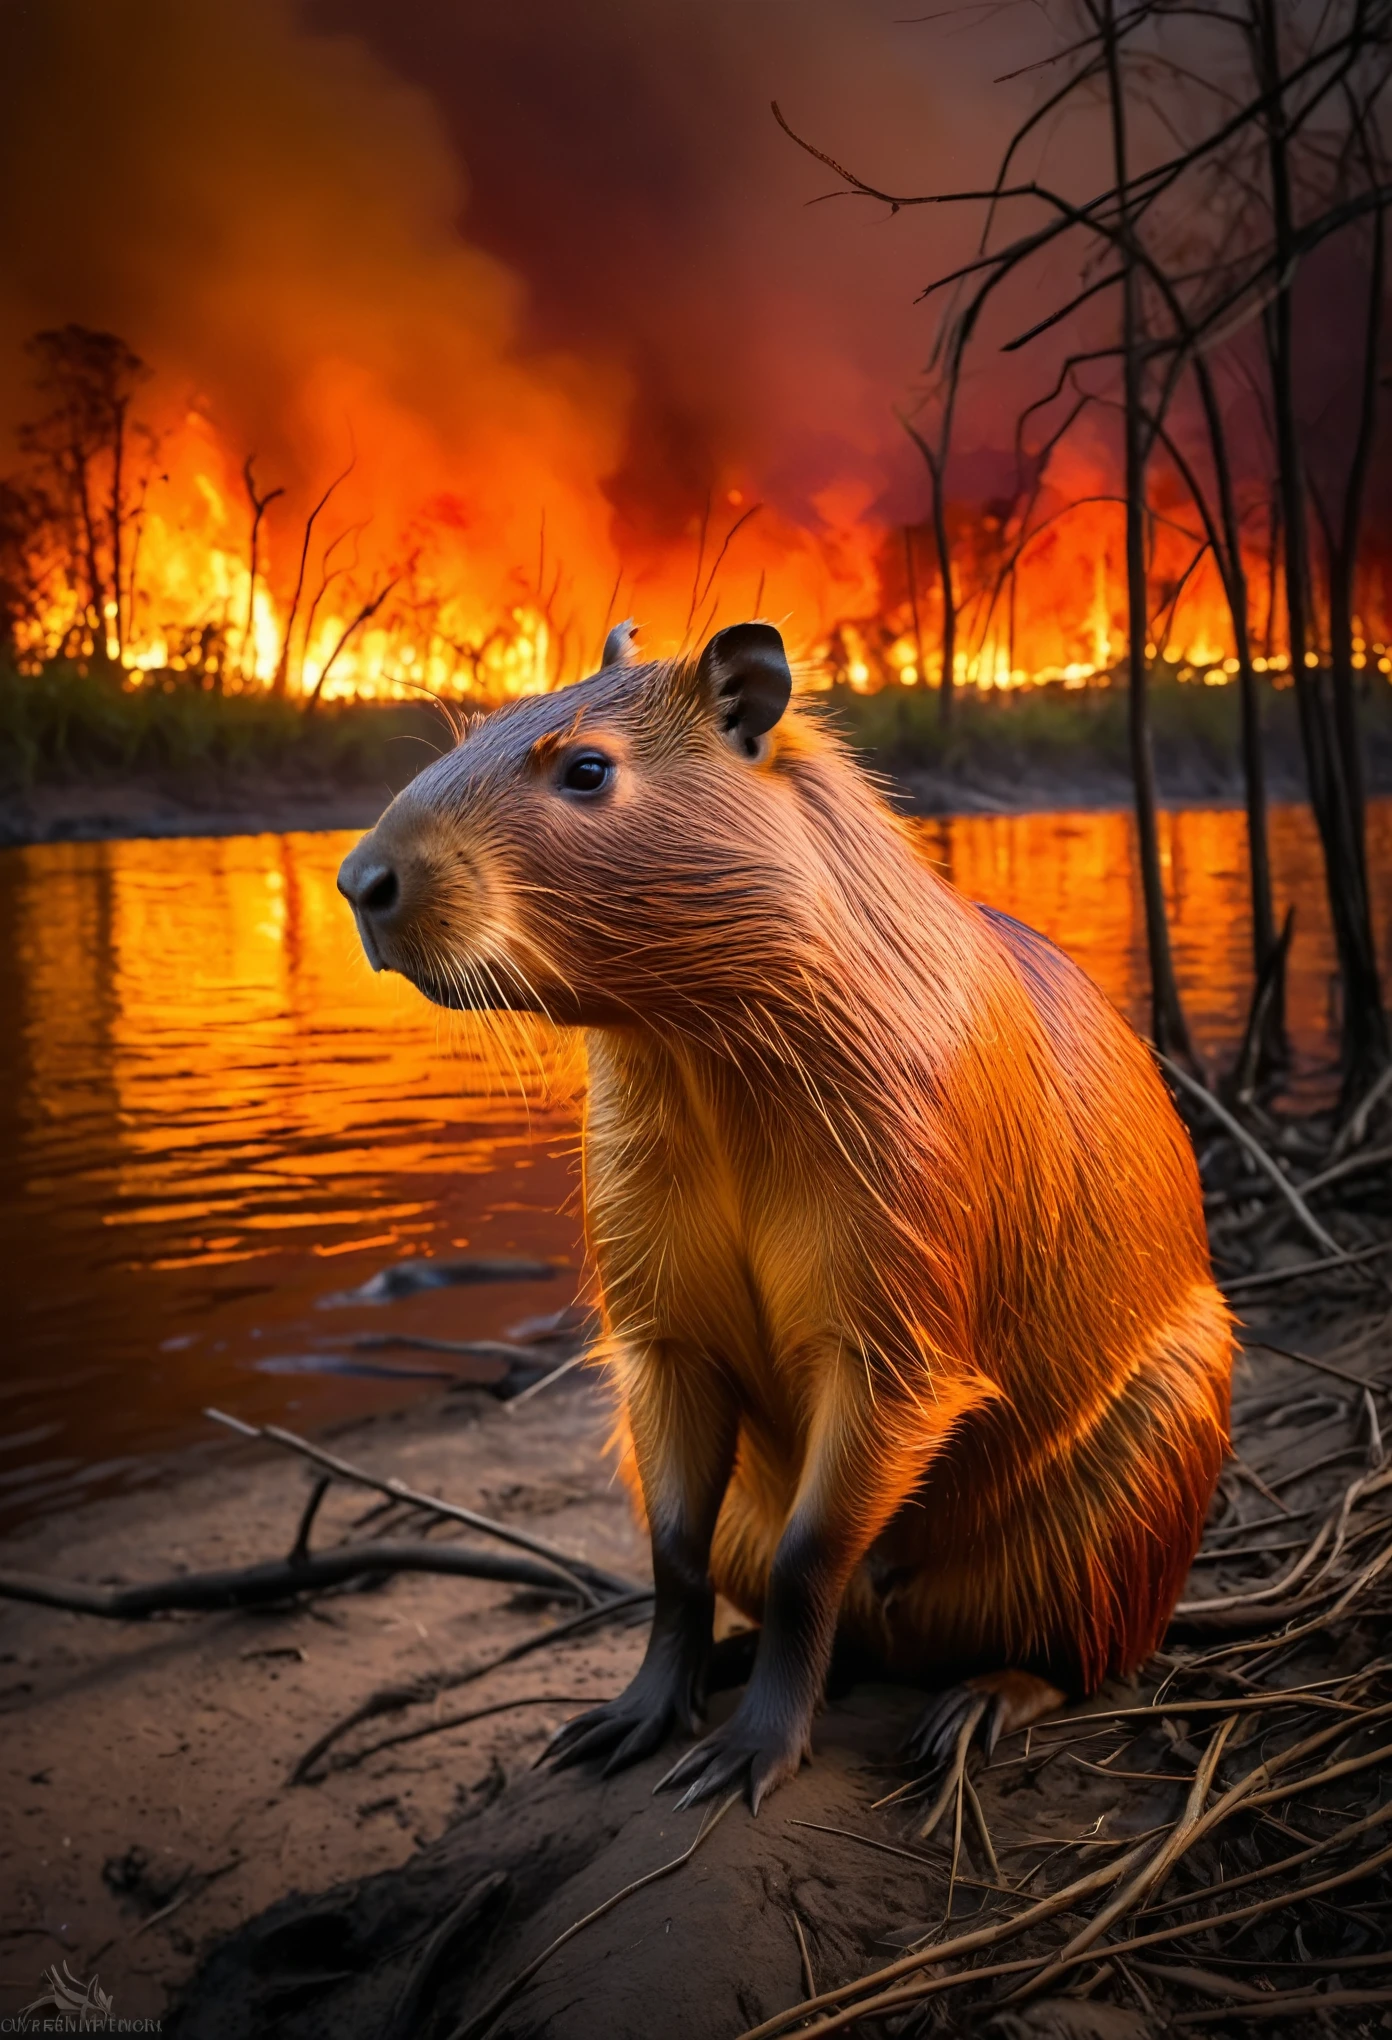 A detailed, realistic portrait of a capybara sitting by the riverbank, gazing sorrowfully towards a forest in the distance. The forest is engulfed in flames, casting an orange and red glow over the scene. The capybara's fur is smooth and shiny, and its large, round eyes reflect the sadness and helplessness it feels. The river flows calmly beside it, contrasting with the chaos and destruction of the burning forest. The lighting and shadows are carefully rendered, creating a mood of melancholy and loss.